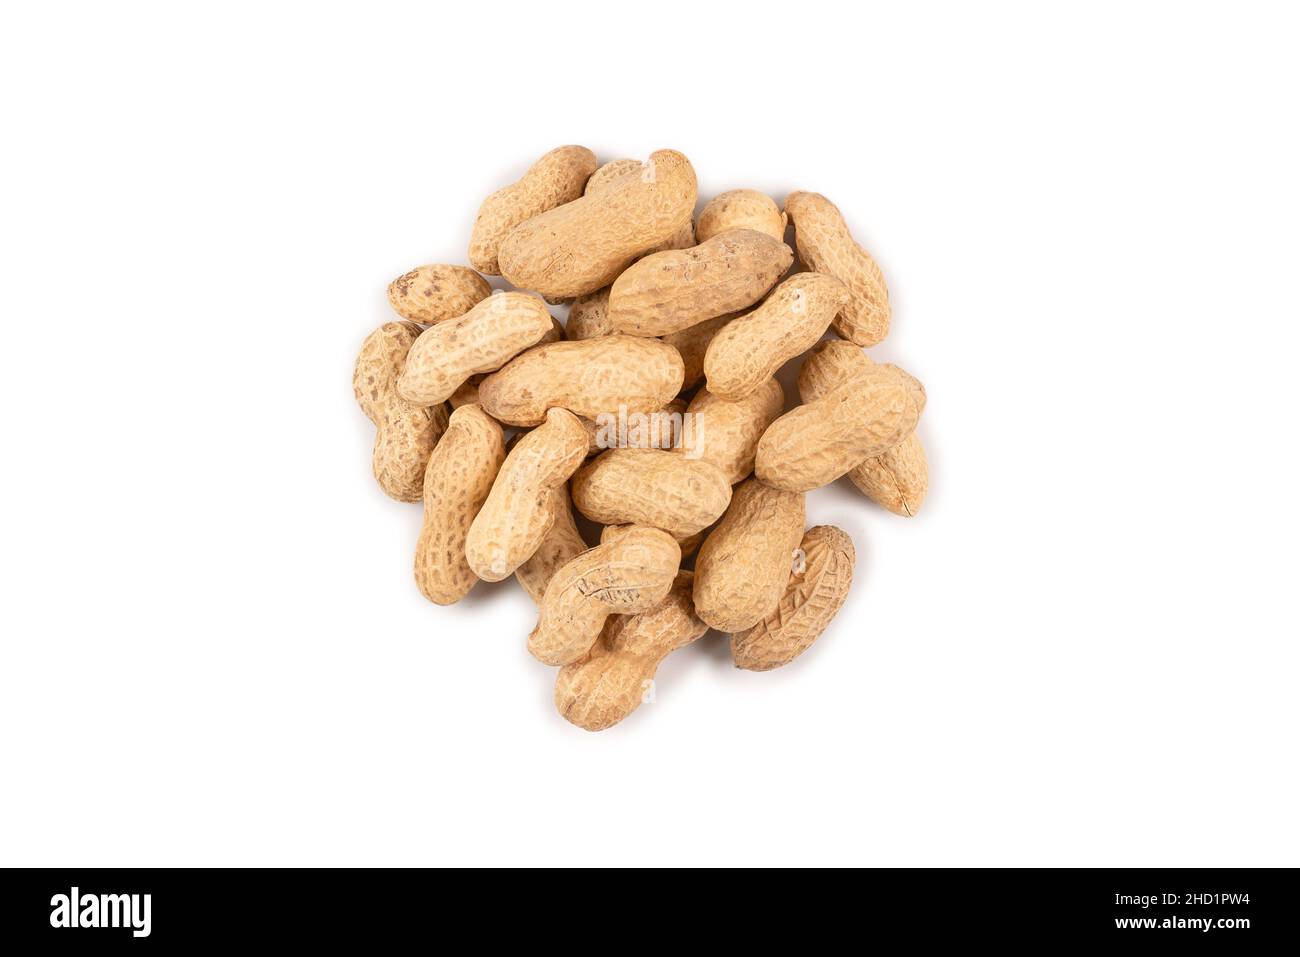 Group of Arachis isolated on a white background. Stock Photo